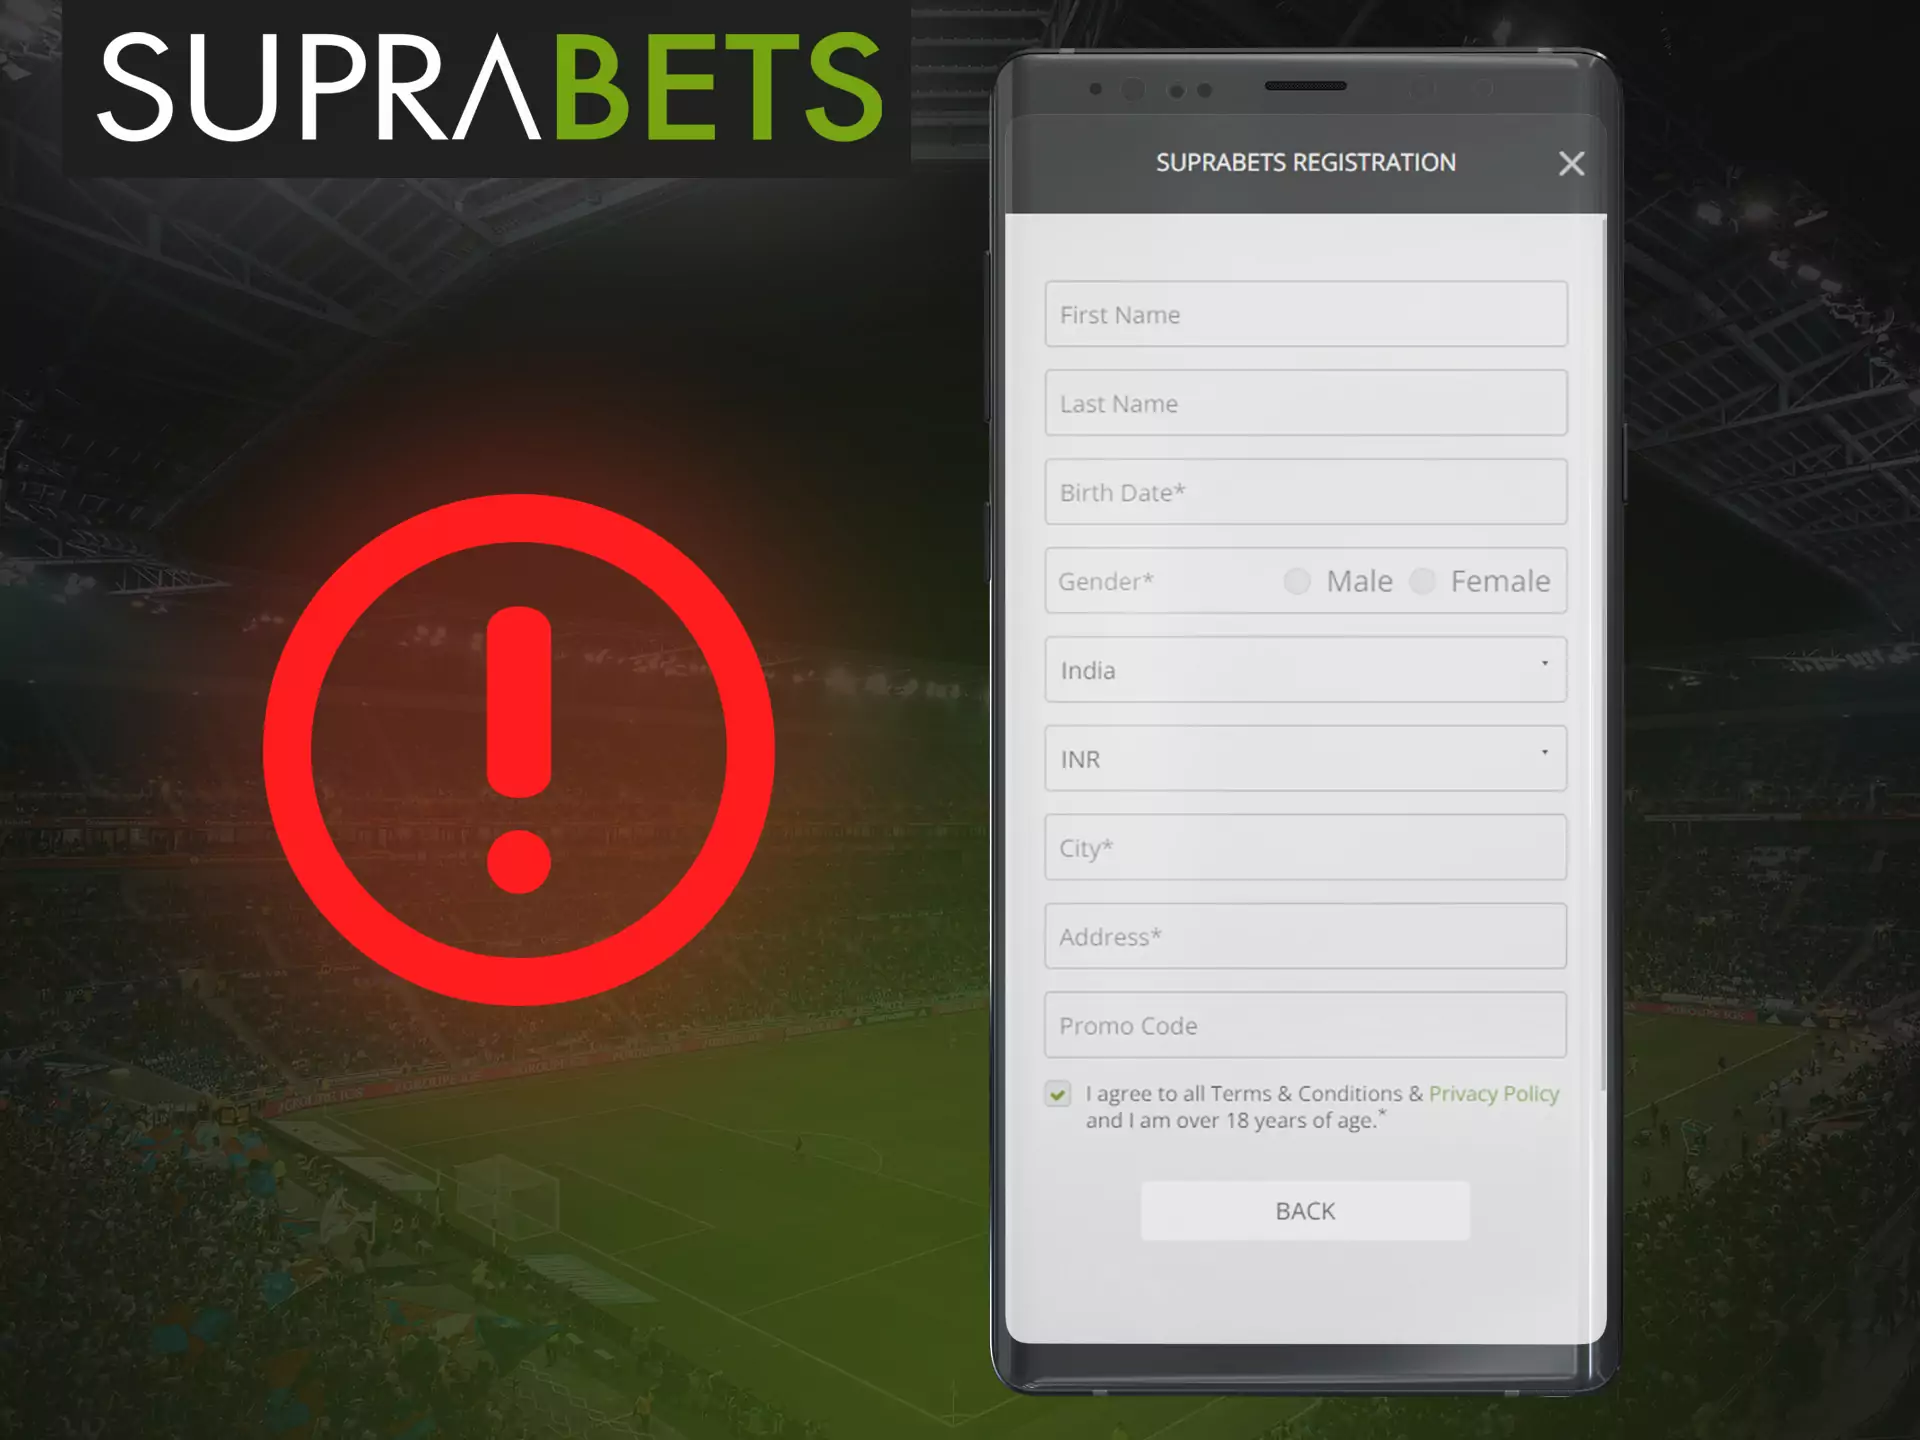 During registration on Suprabets, you need to provide your personal information, but it is safe for users.